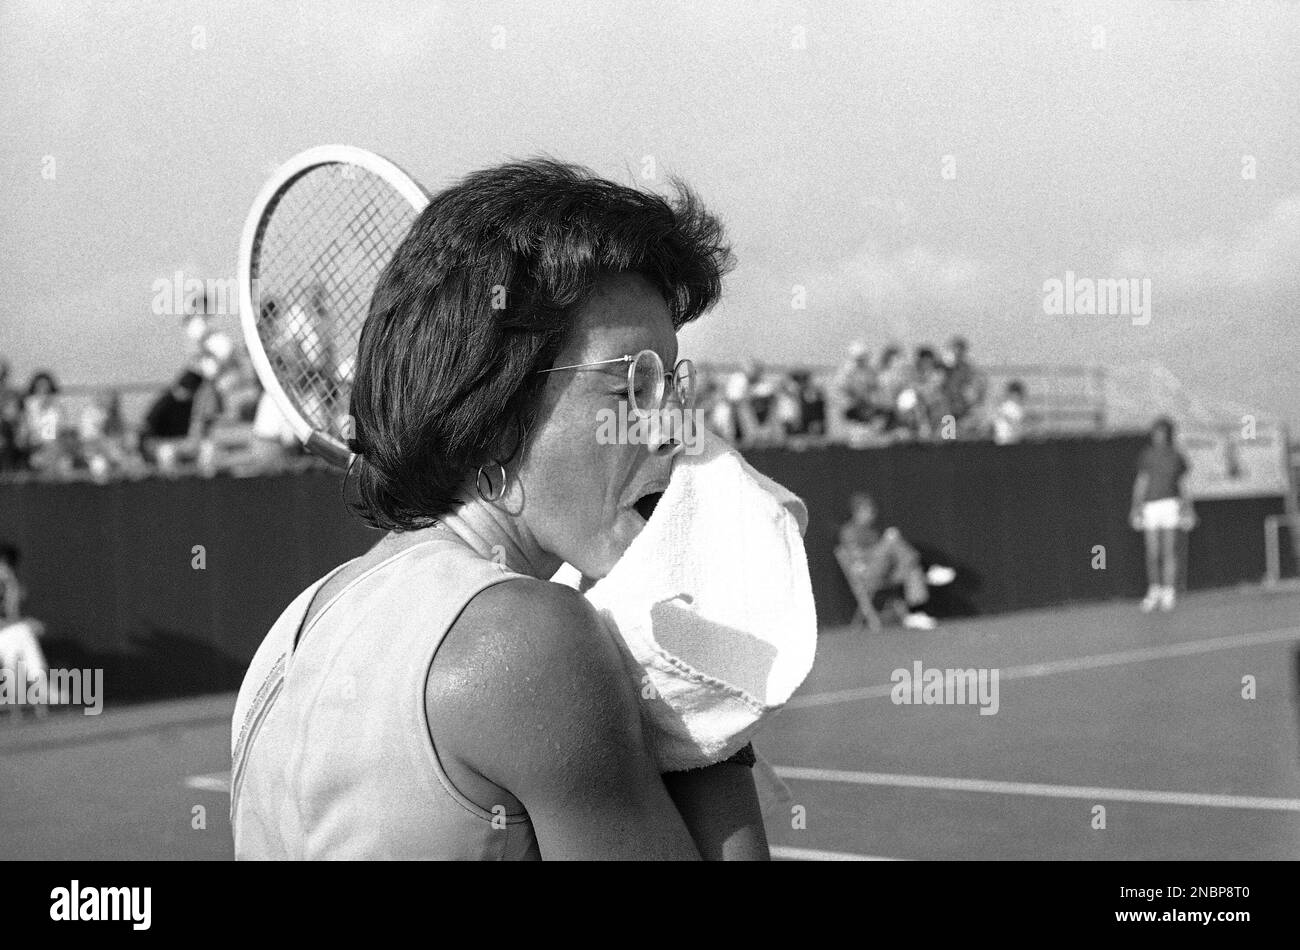 Billie Jean King, who won the $100,000 “Battle of the Sexes” tennis match  from Bobby Riggs, as she towels down during her tournament quarterfinals  match with Robin Tinney at the Houston Virginia